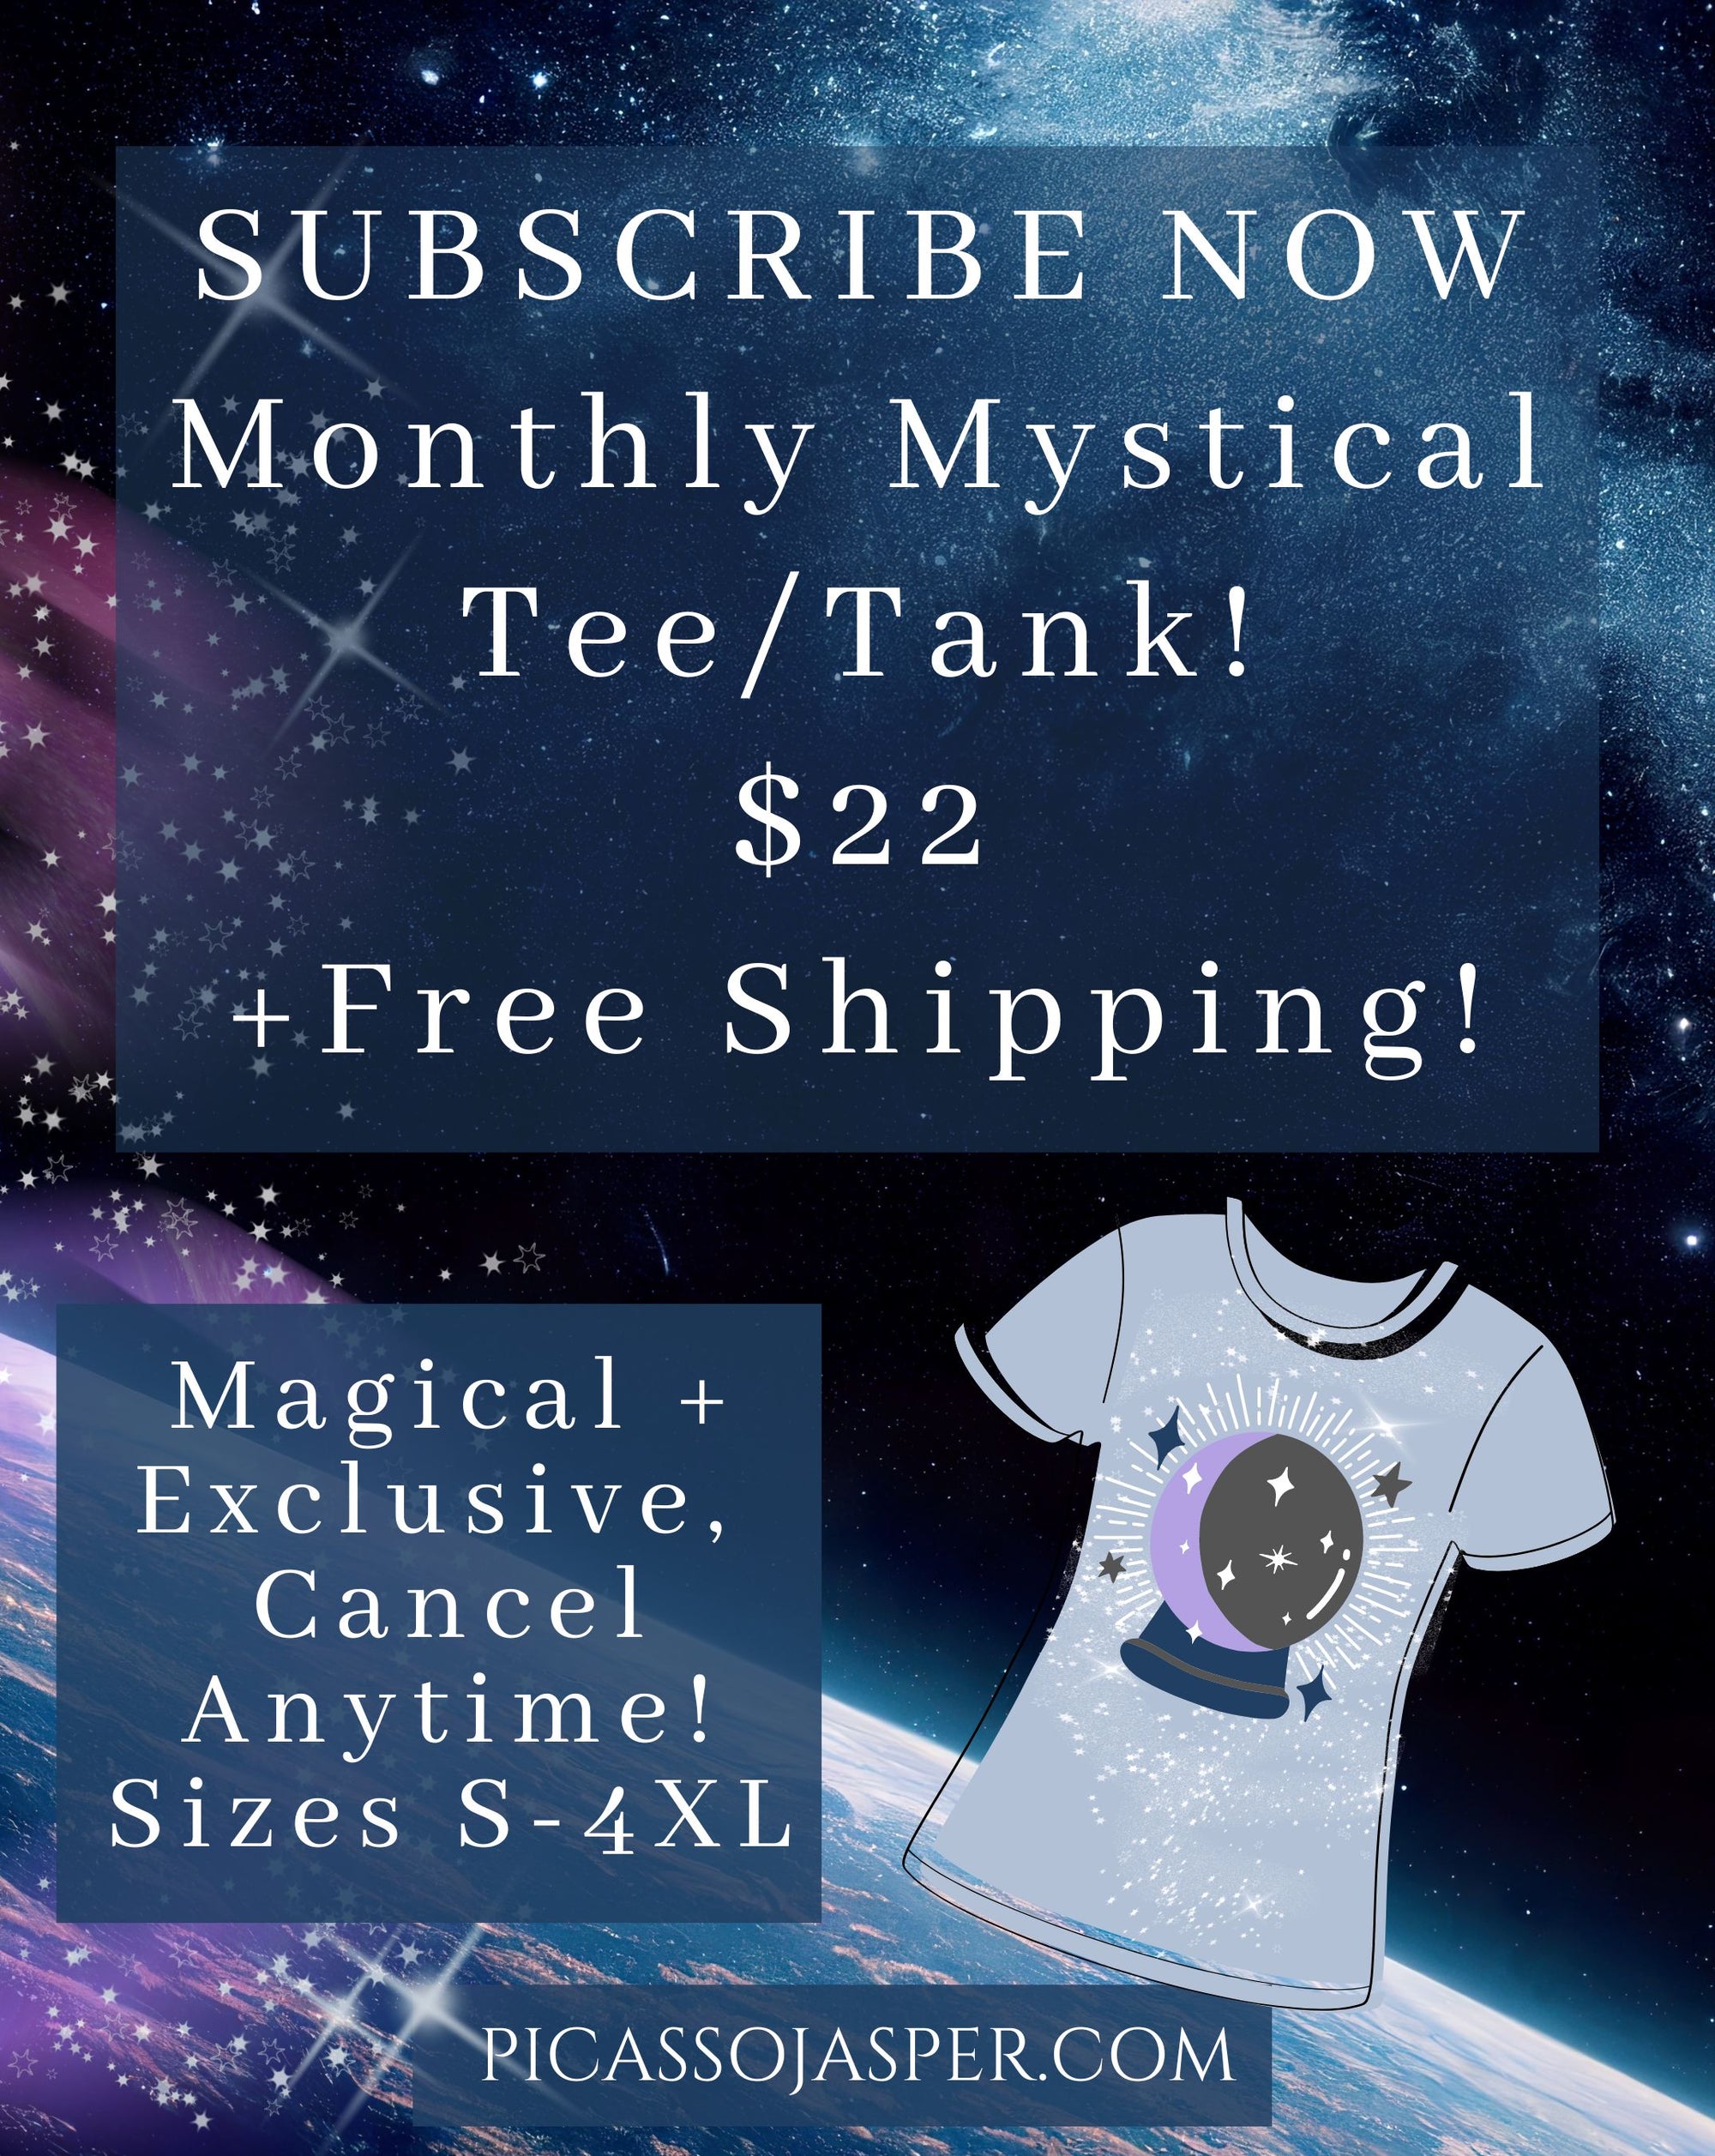 Saged & Stoned, Monthly Tee/Tank Subscription + Free Shipping!